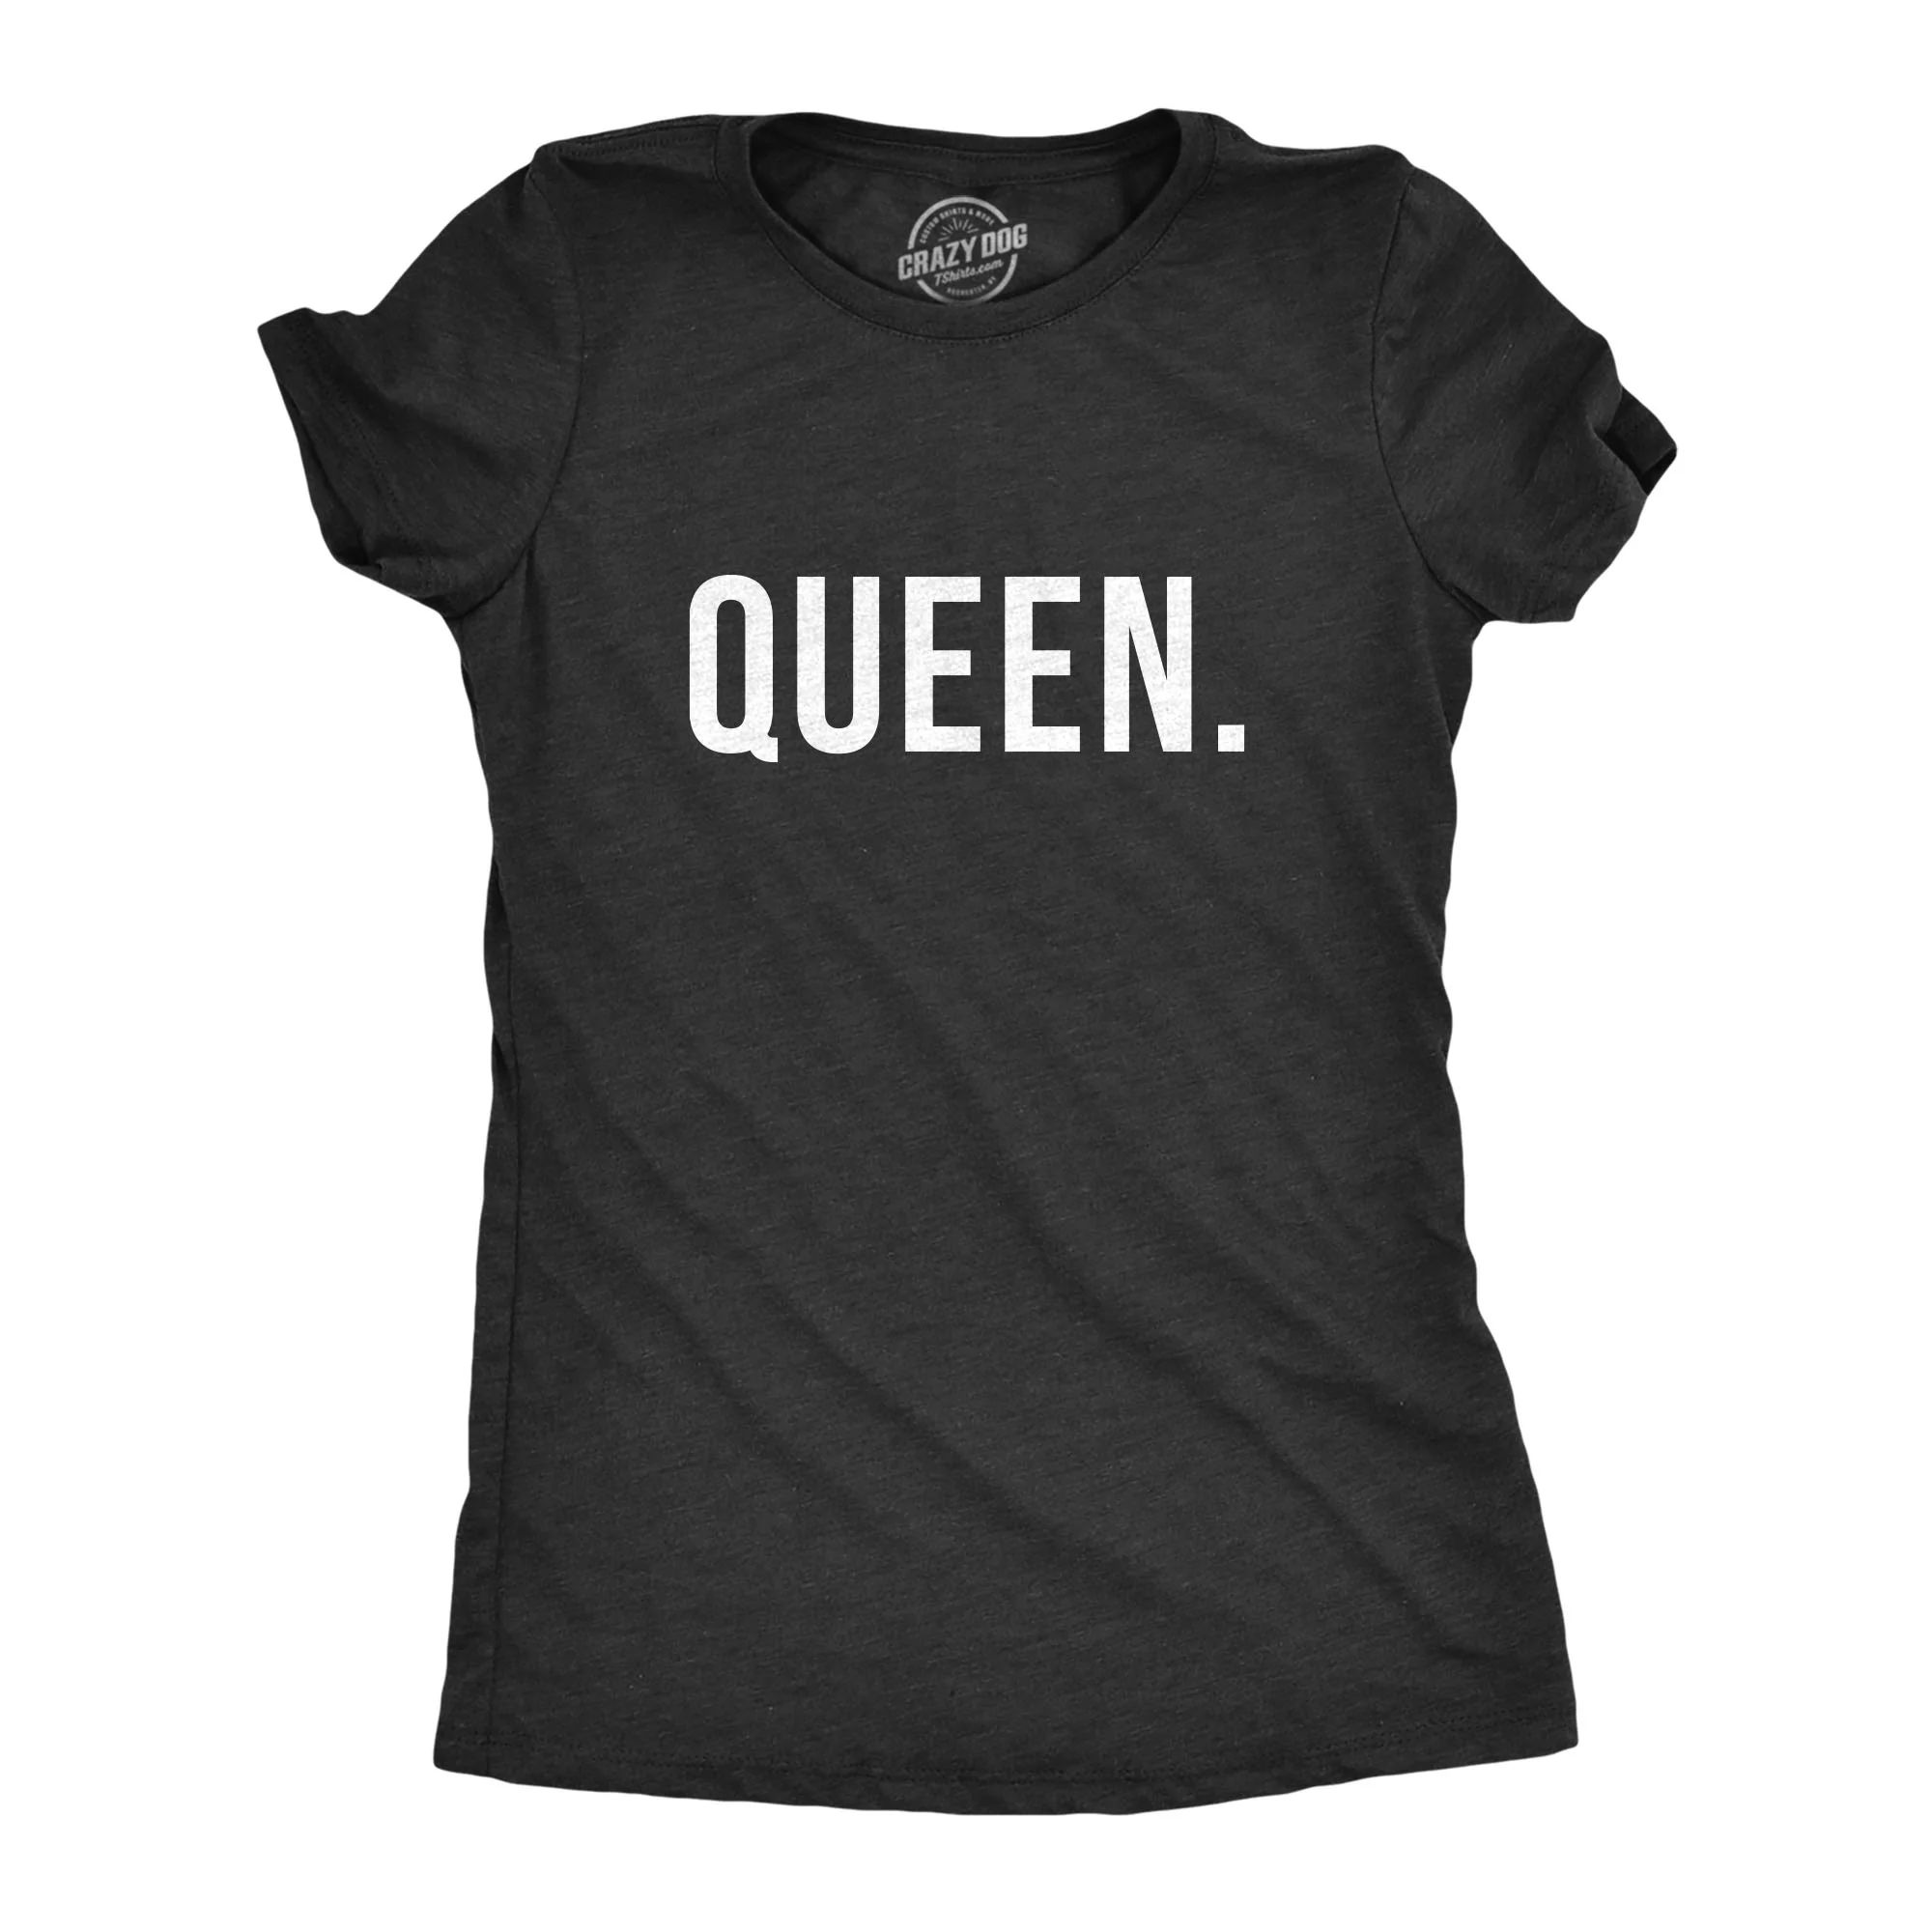 Womens Queen Shirt Funny Novelty Tee Matching King and Queen Couples T shirt (Heather Black) - S ... | Walmart (US)